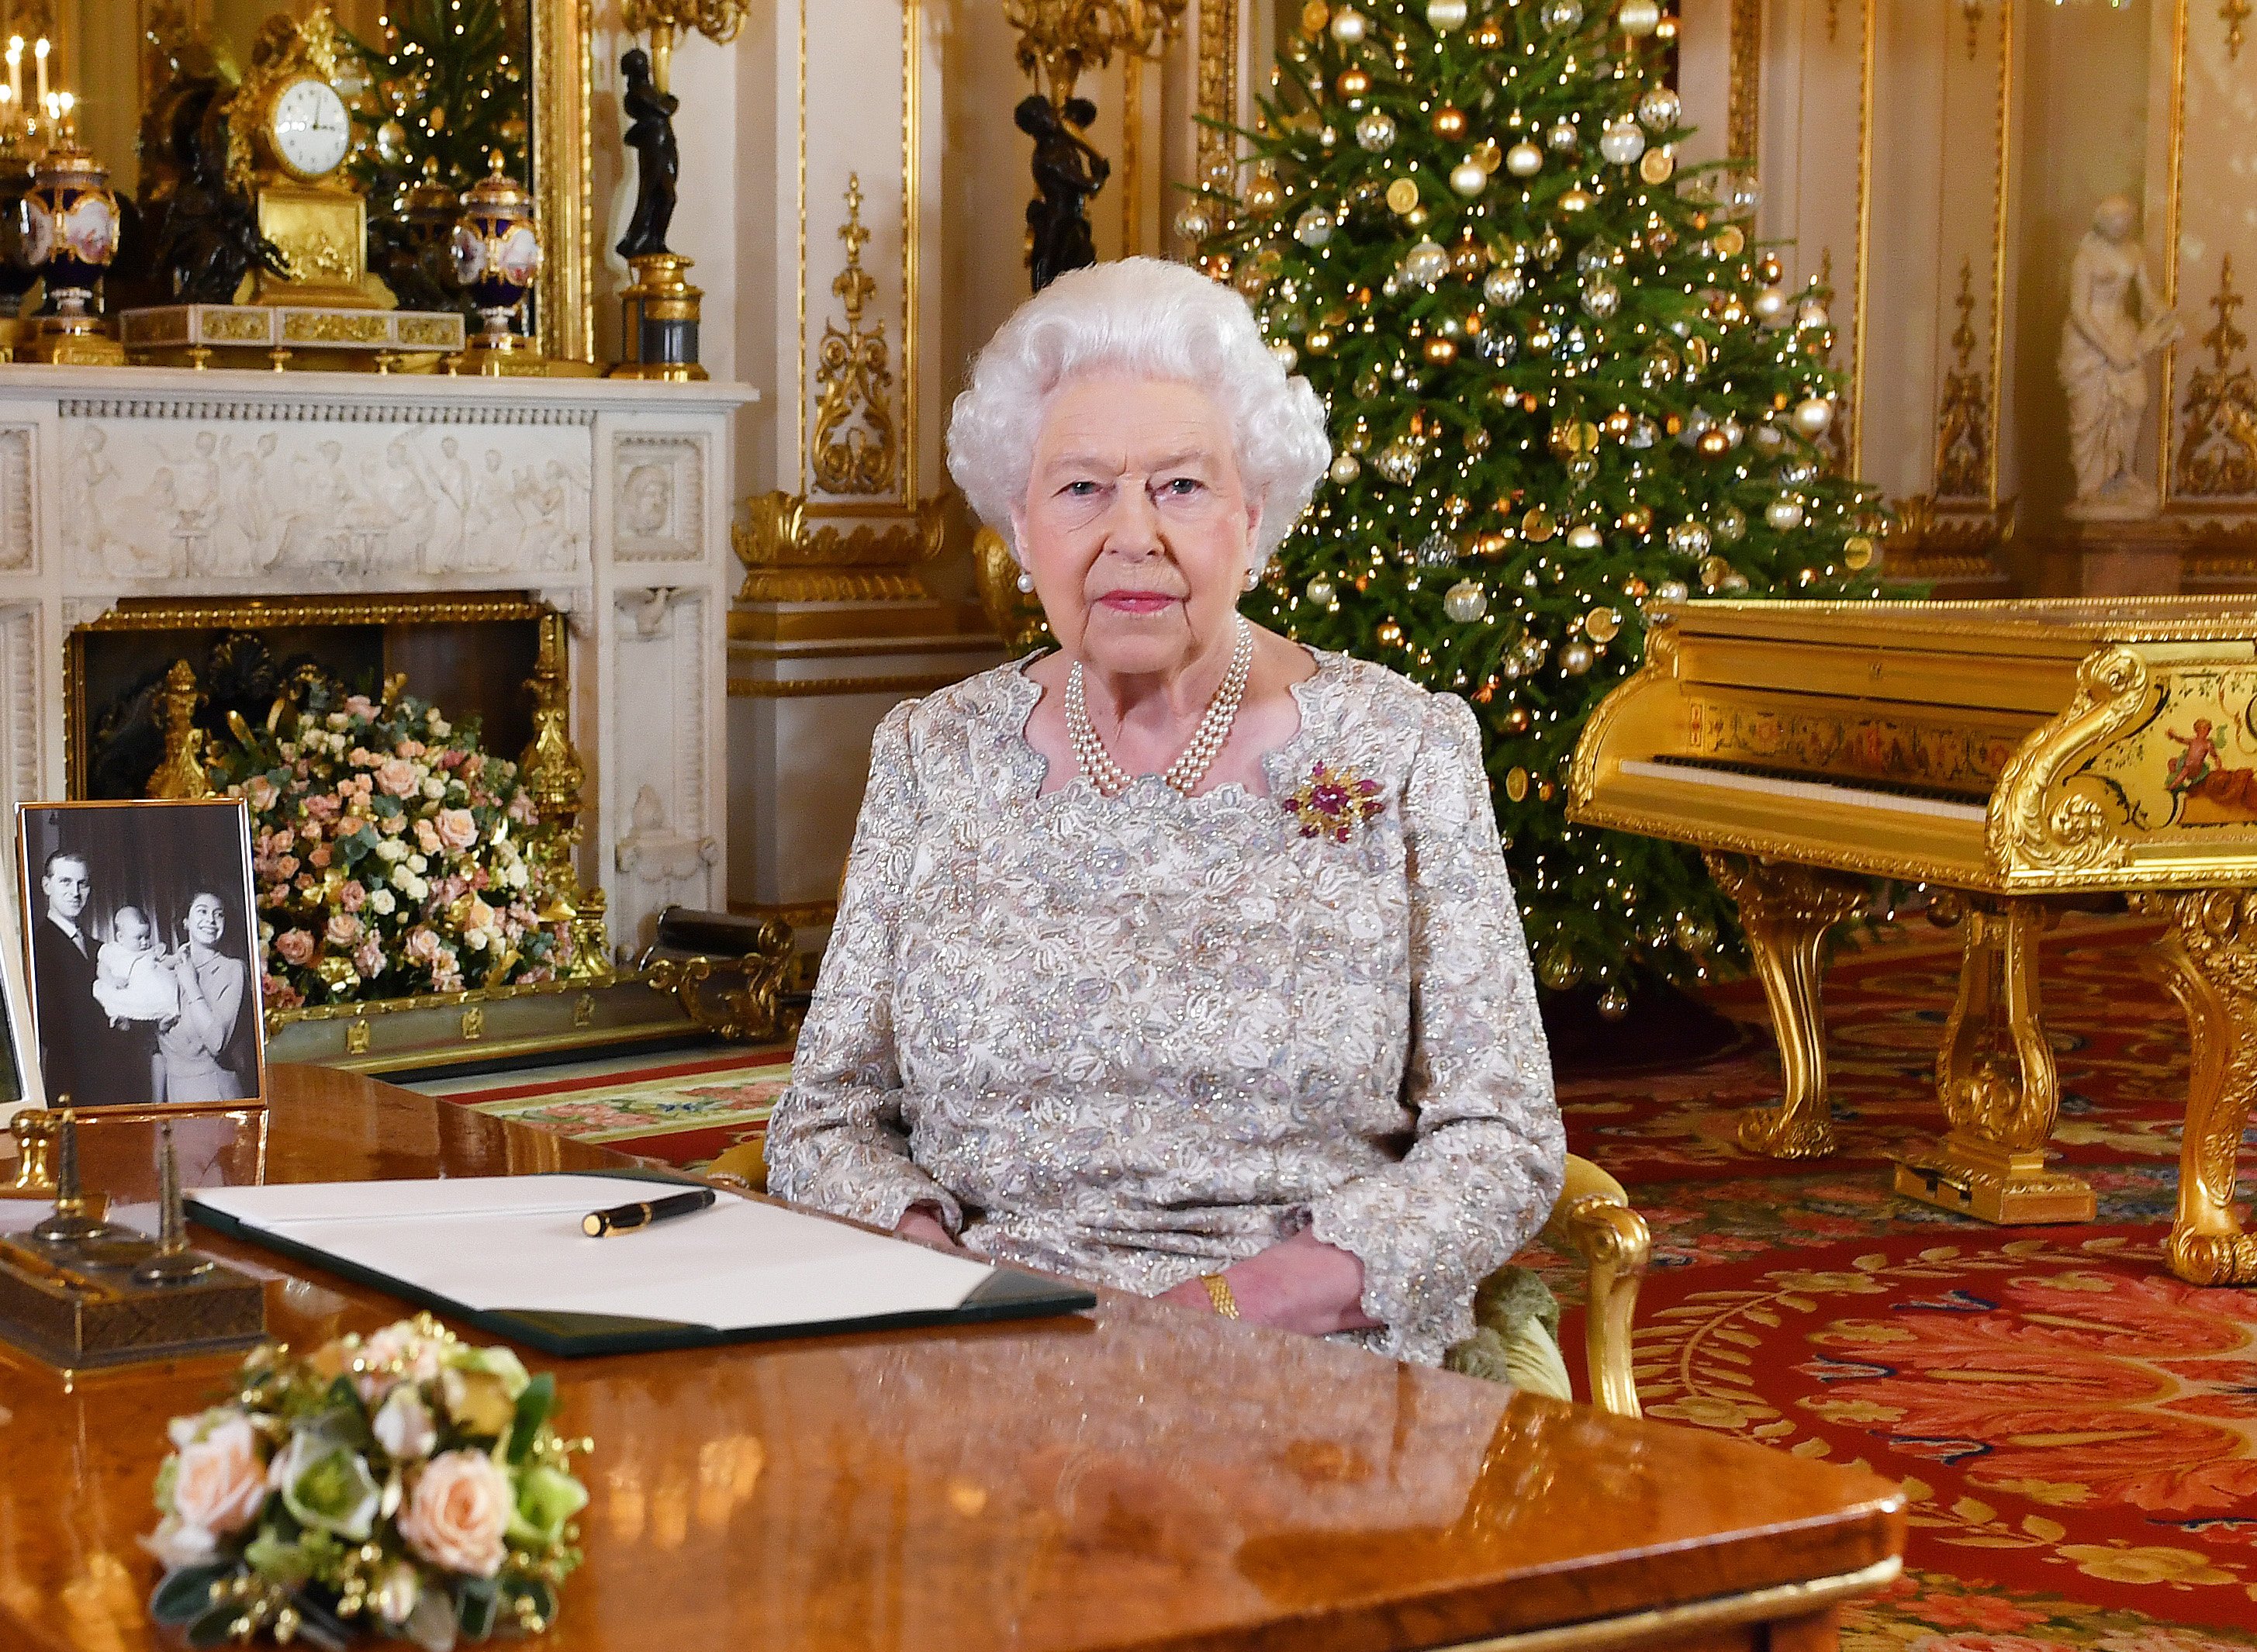 Queen Elizabeth II poses for a photo after she recorded her annual Christmas Day message in the White Drawing Room at Buckingham Palace in a picture released on December 24, 2018, in London, United Kingdom. | Source: Getty Images